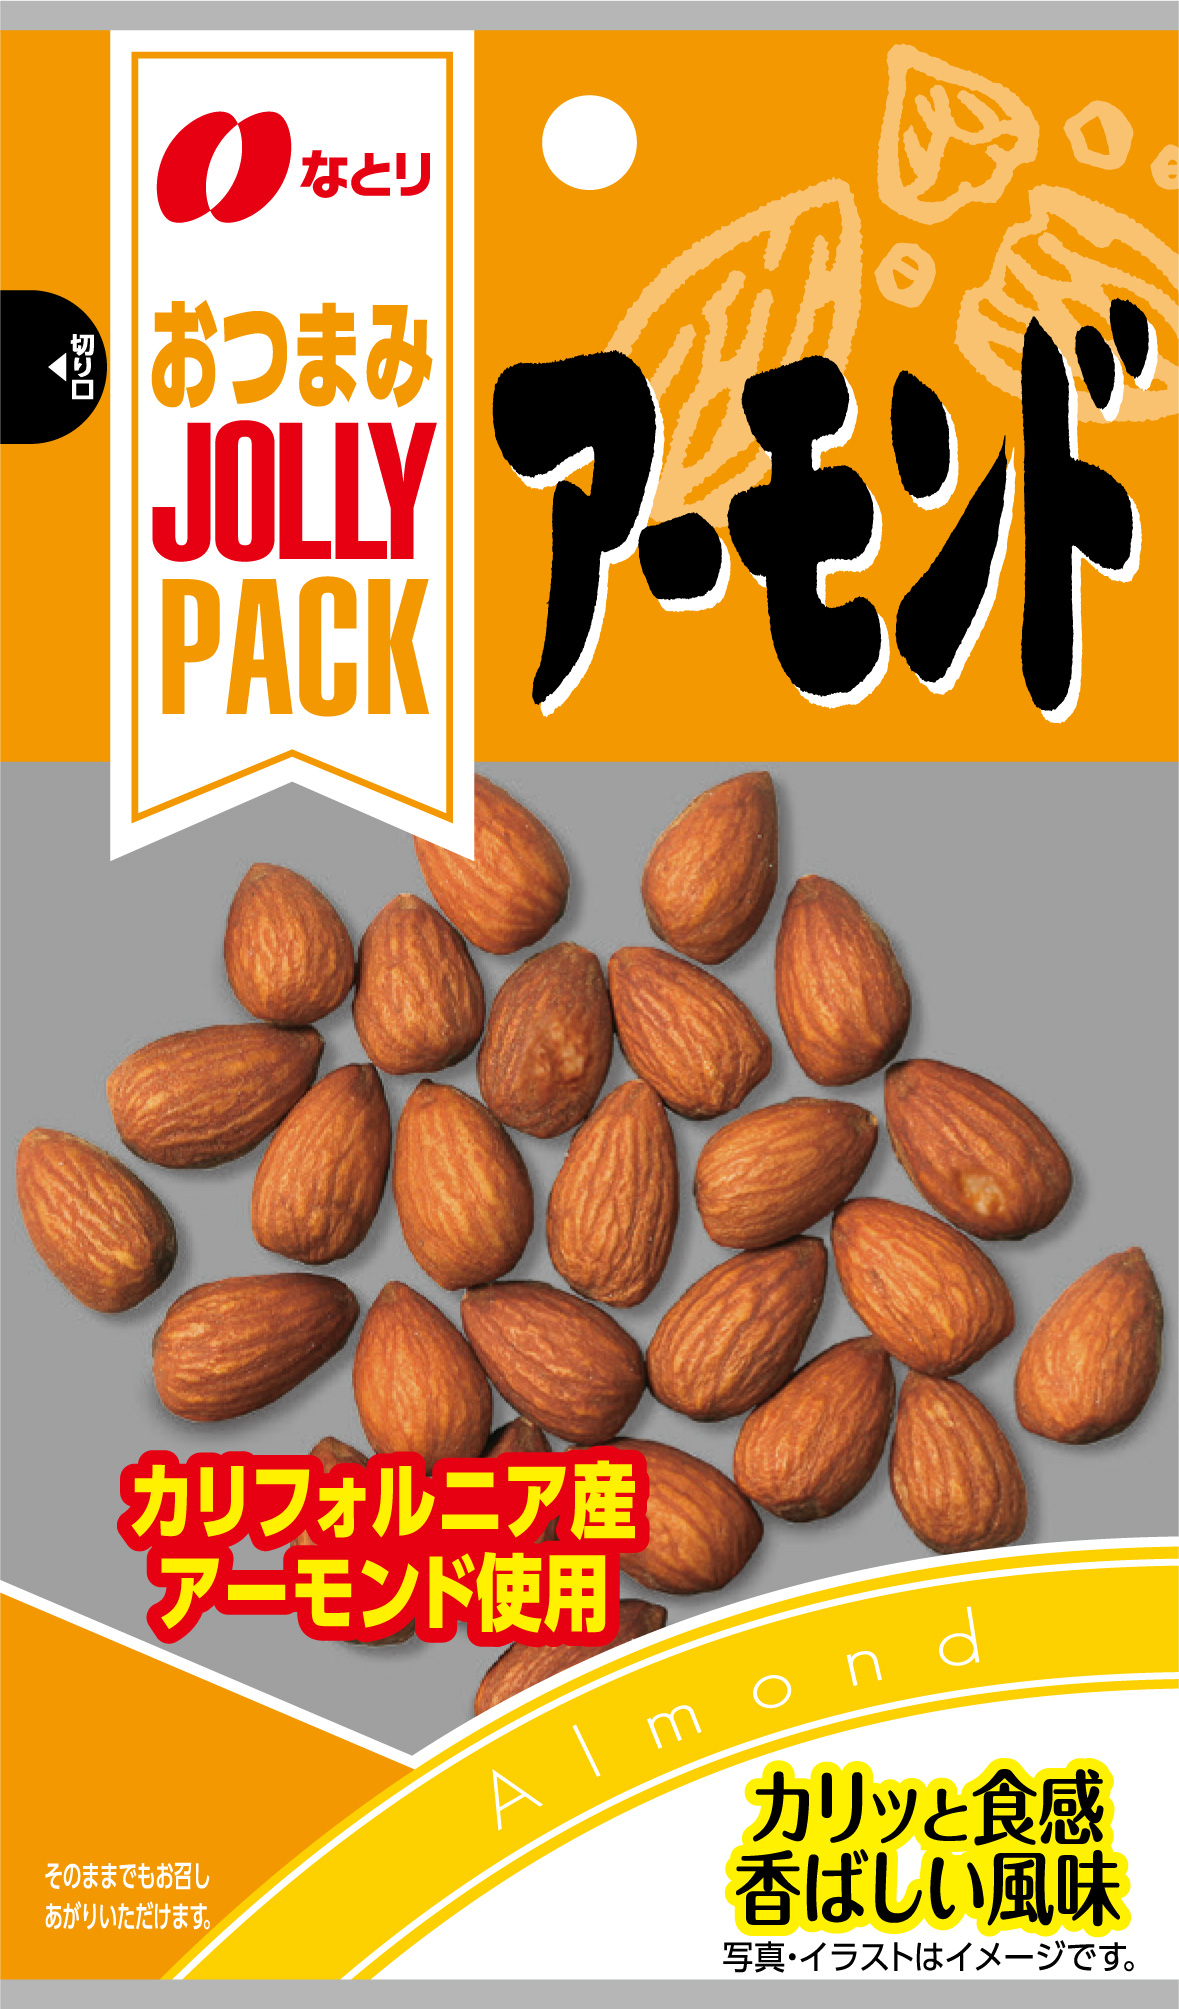 JOLLY PACK<br>アーモンド